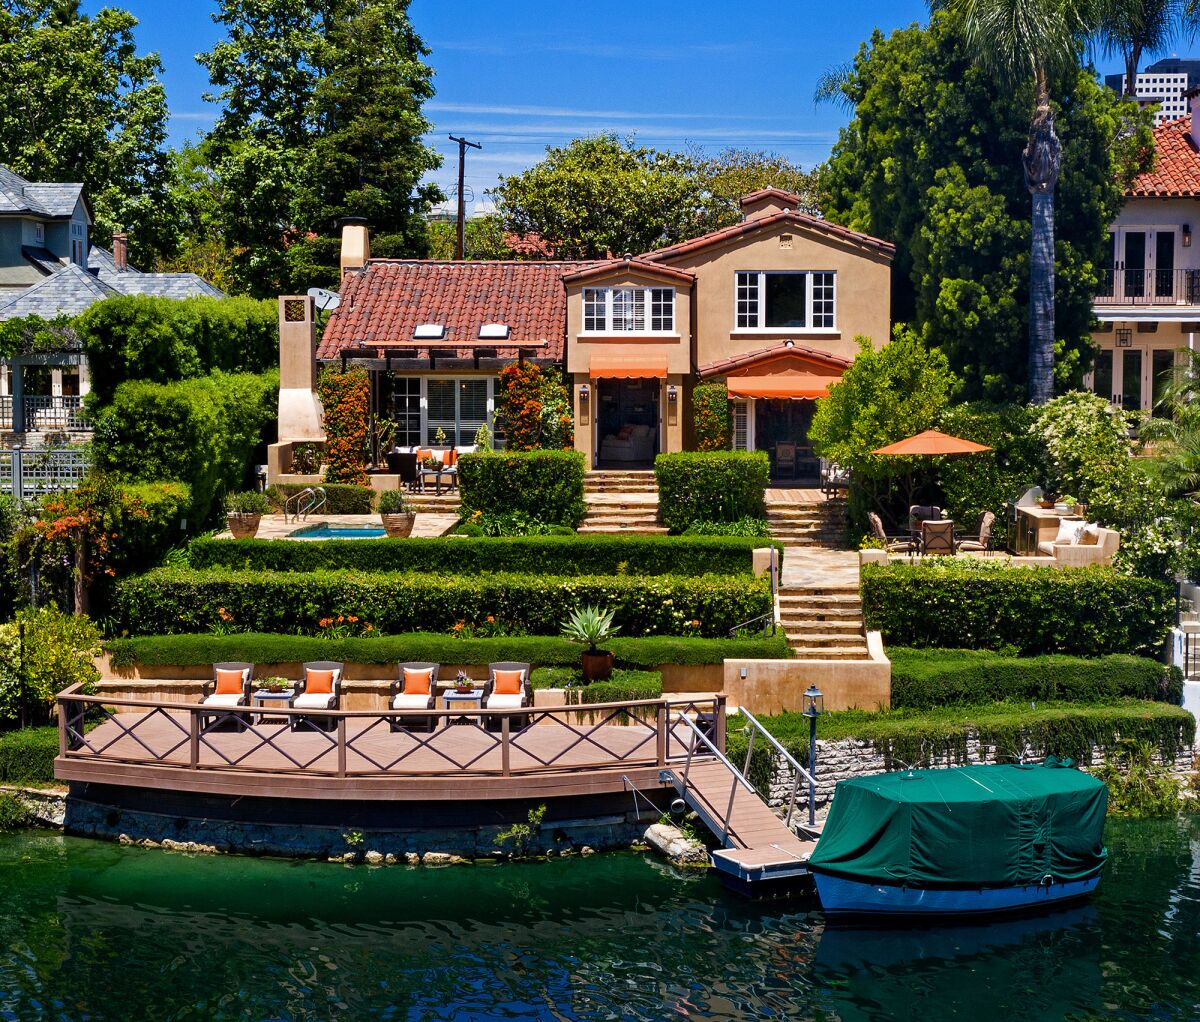 Exterior of Spanish-style home with boat dock